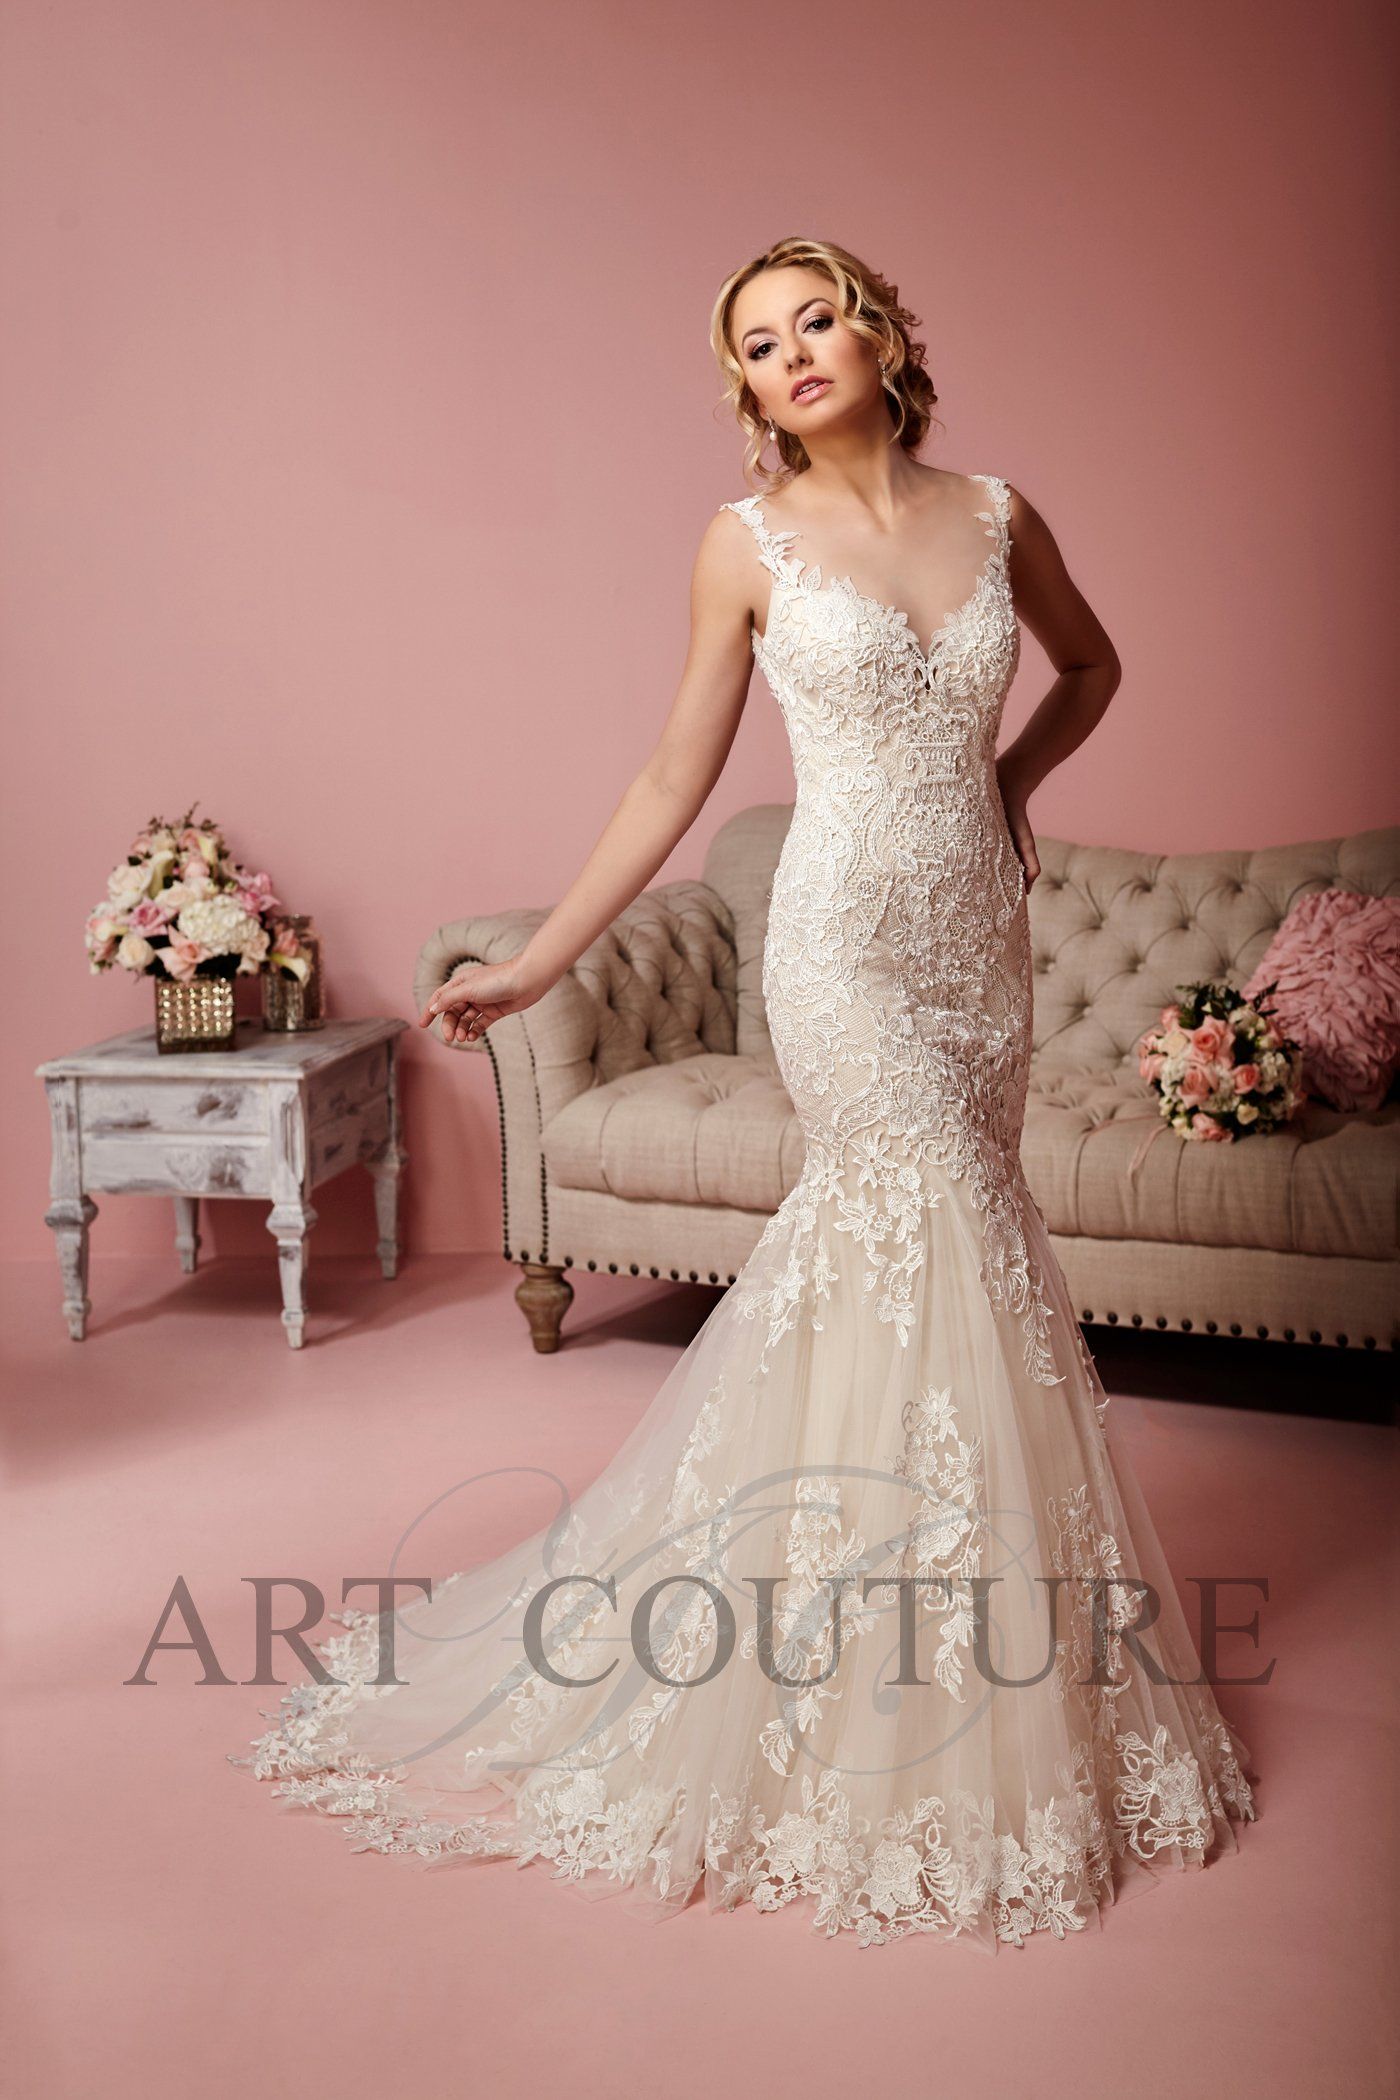 Contact us for a lace fishtail gown with V neckline